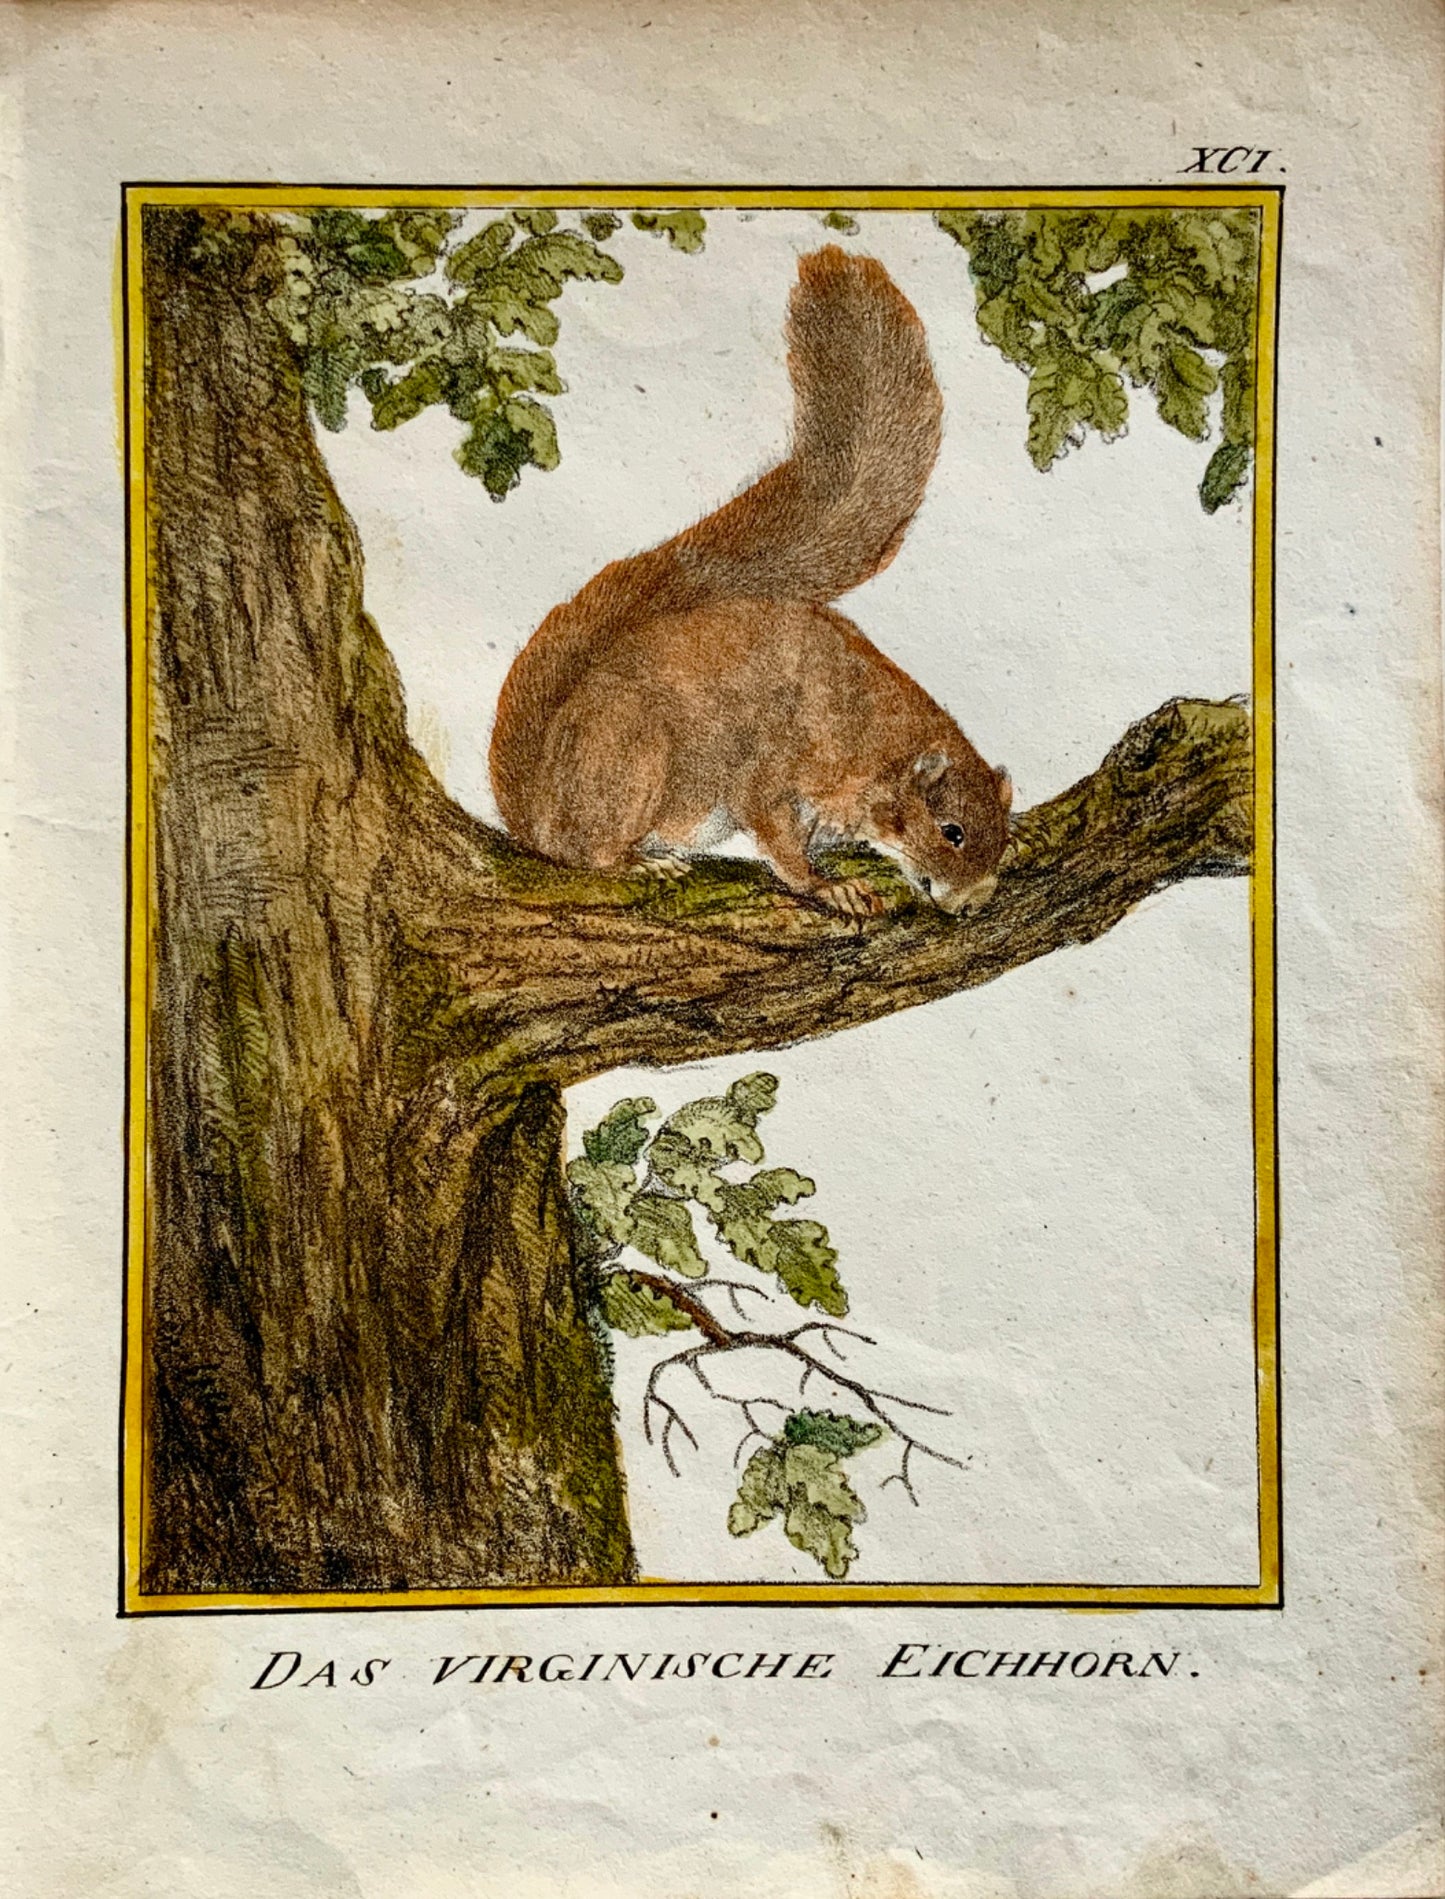 1816 American Squirrel INCUNABULA OF LITHOGRAPHY K. Schmidt 4to hand coloured - Mammal